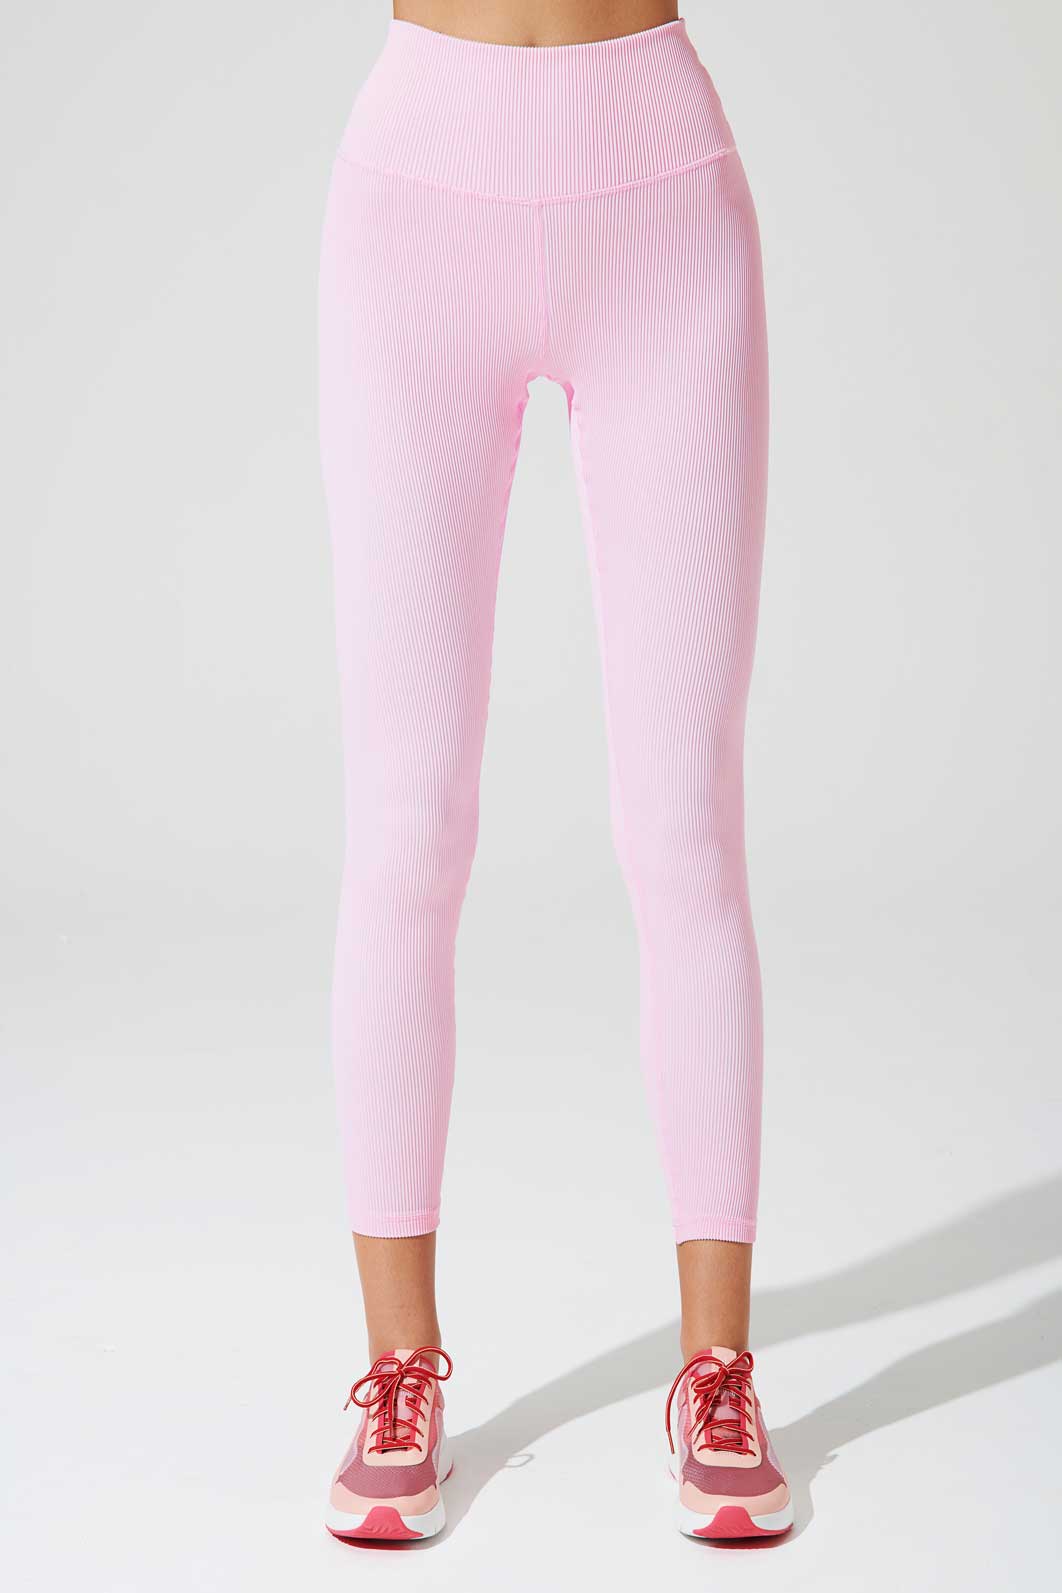 High-waist ribbed leggings in gilly pink for women - OW-0127-WLG-PK - vibrant and stylish.